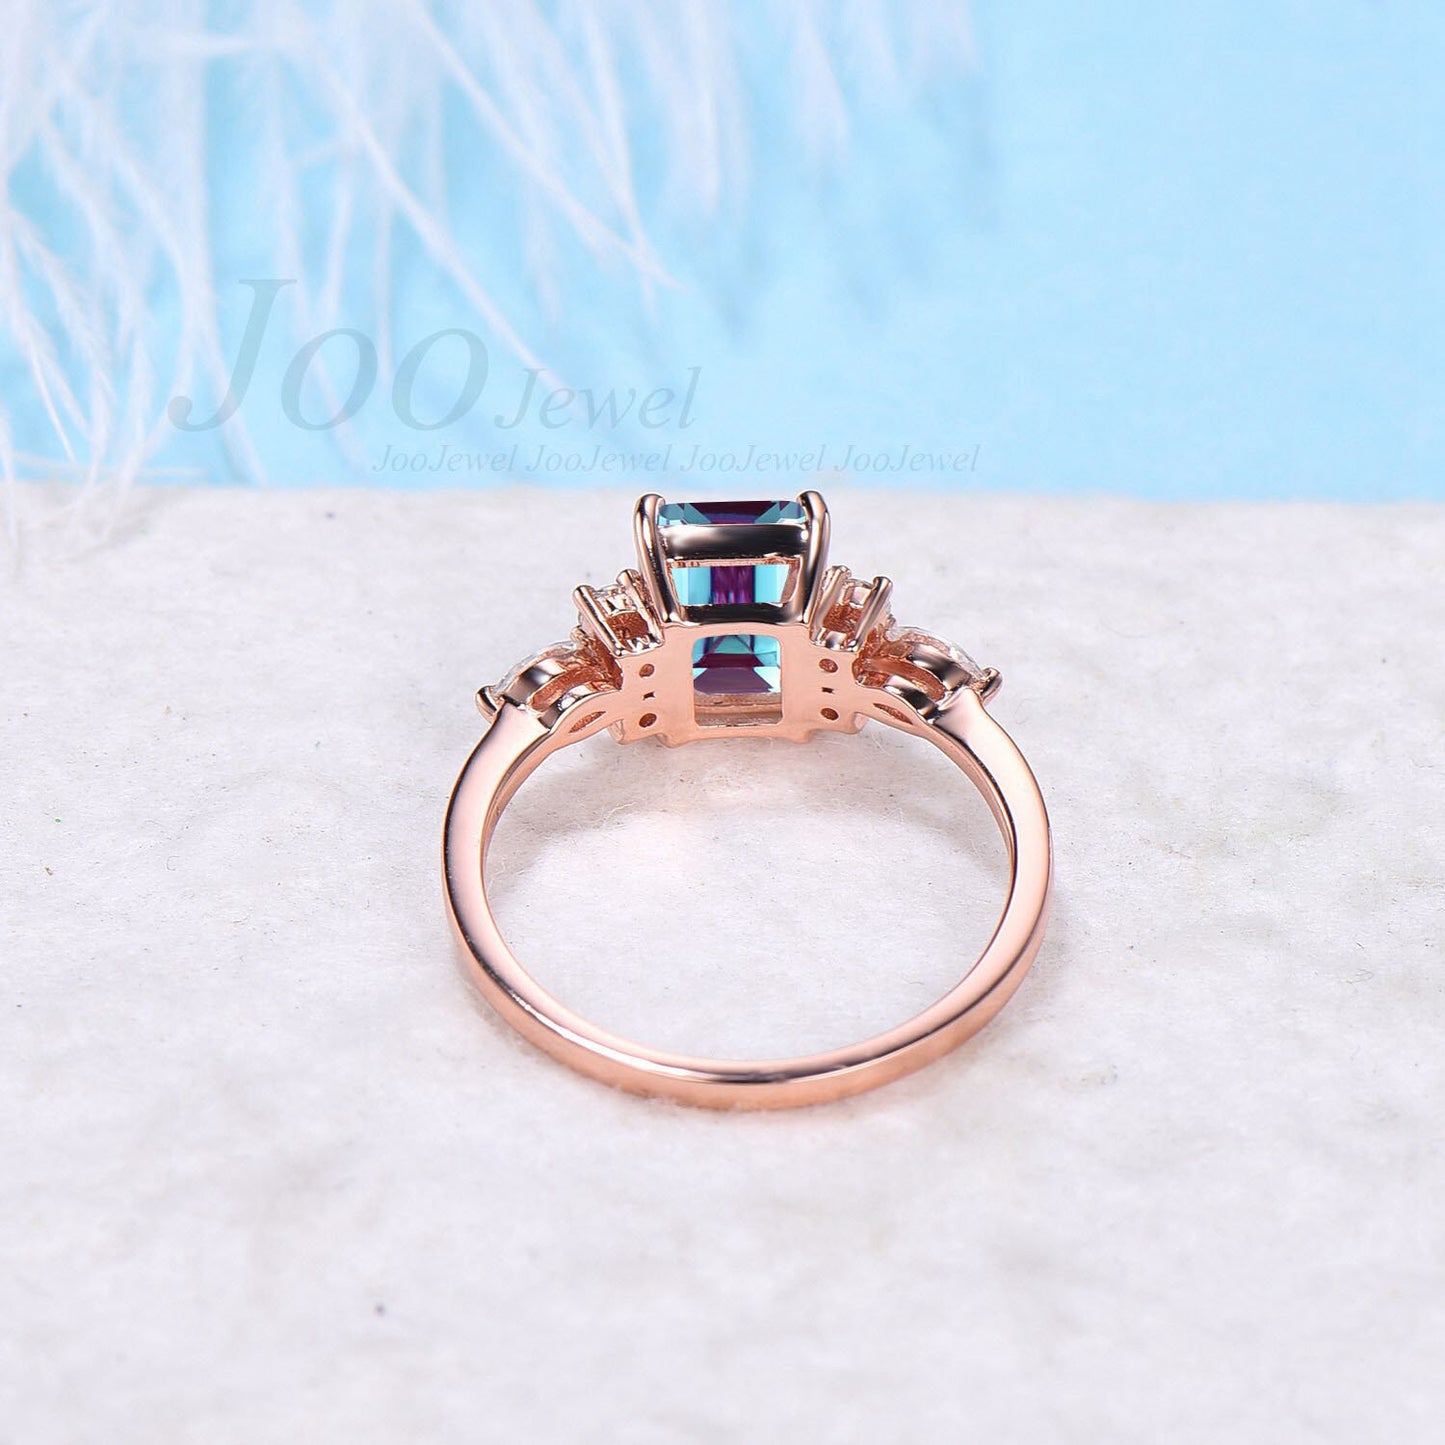 2ct Emerald Alexandrite Ring Cluster Engagement Ring Rose Gold Lab Diamond Ring June Birthstone Color Change Stone Wedding Anniversary Gift